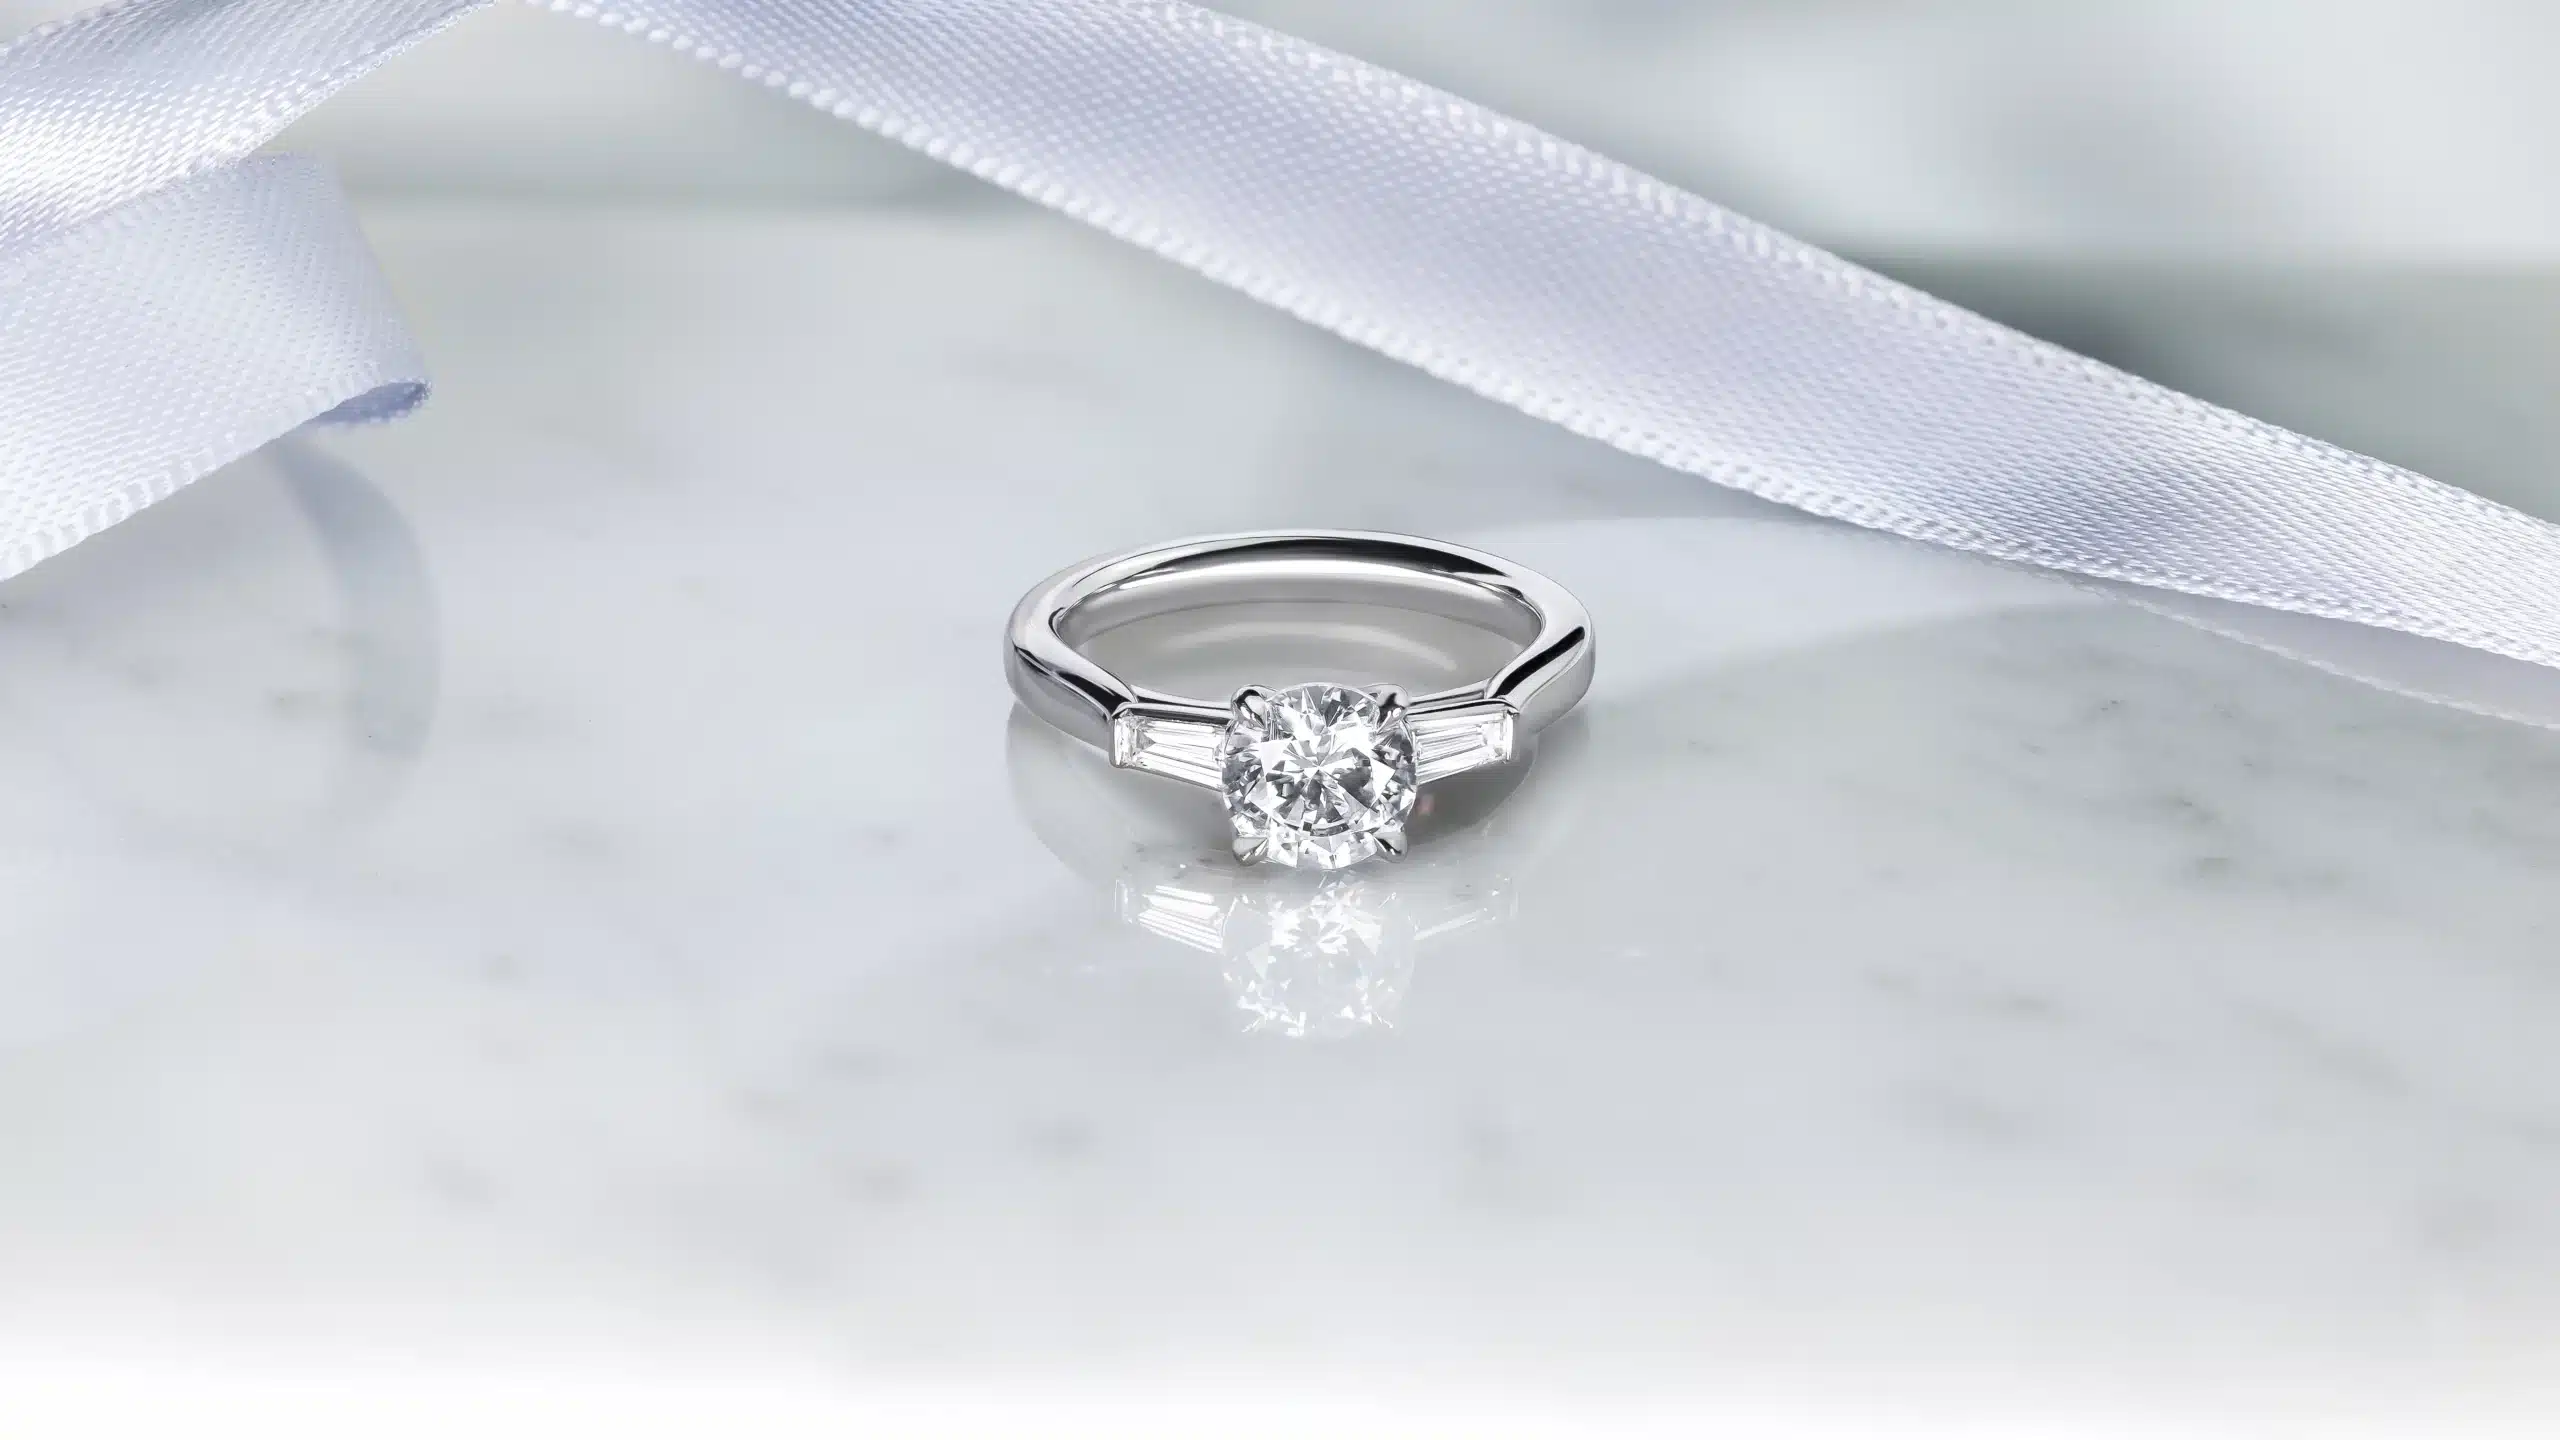 White gold engagement ring with a princess cut design